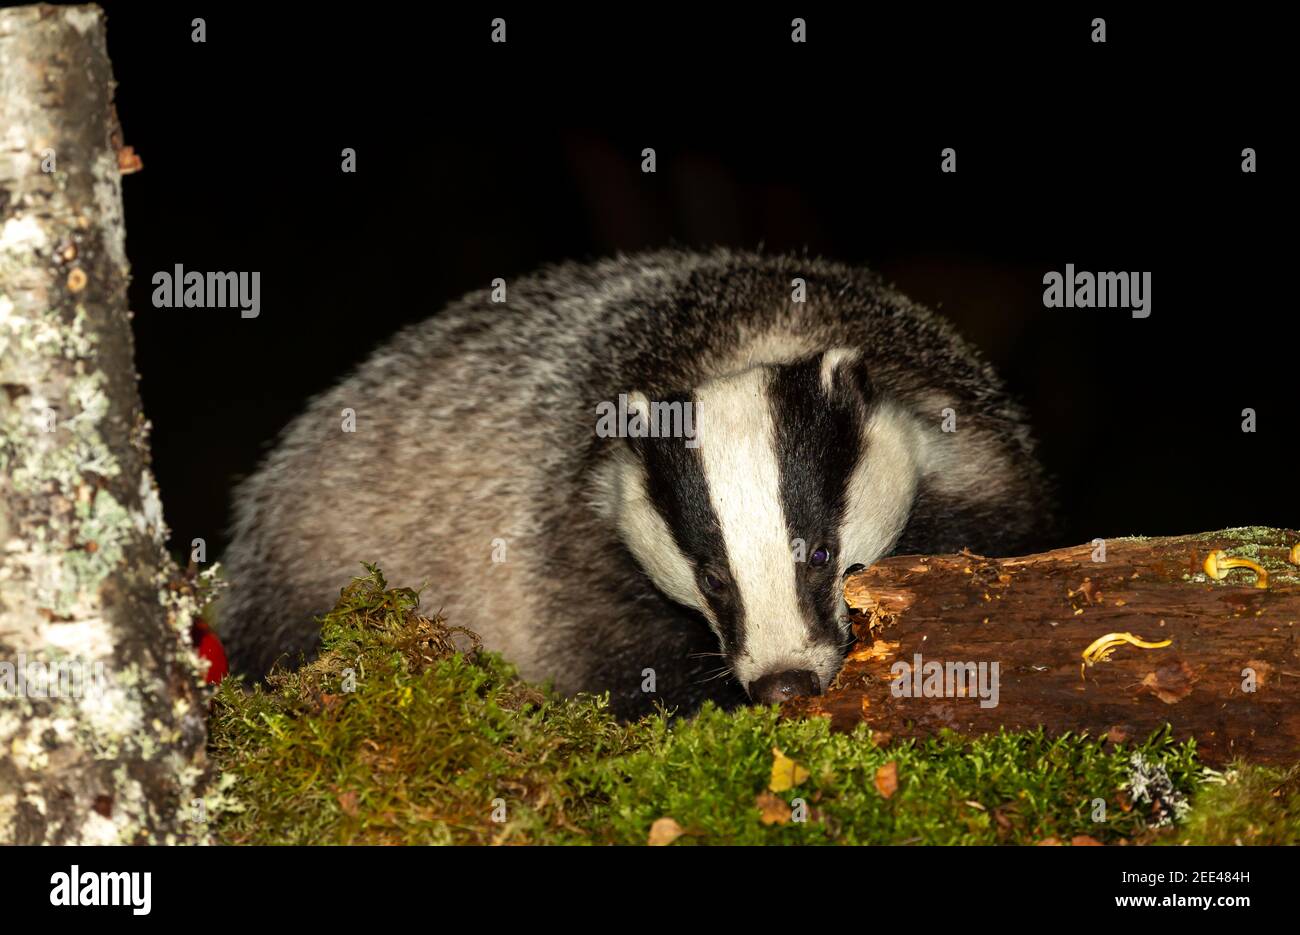 Badger, Scientific name, Meles Meles.  Wild, native badger foraging on a decaying log at night time.  Facing forward with green moss toadstools and a Stock Photo